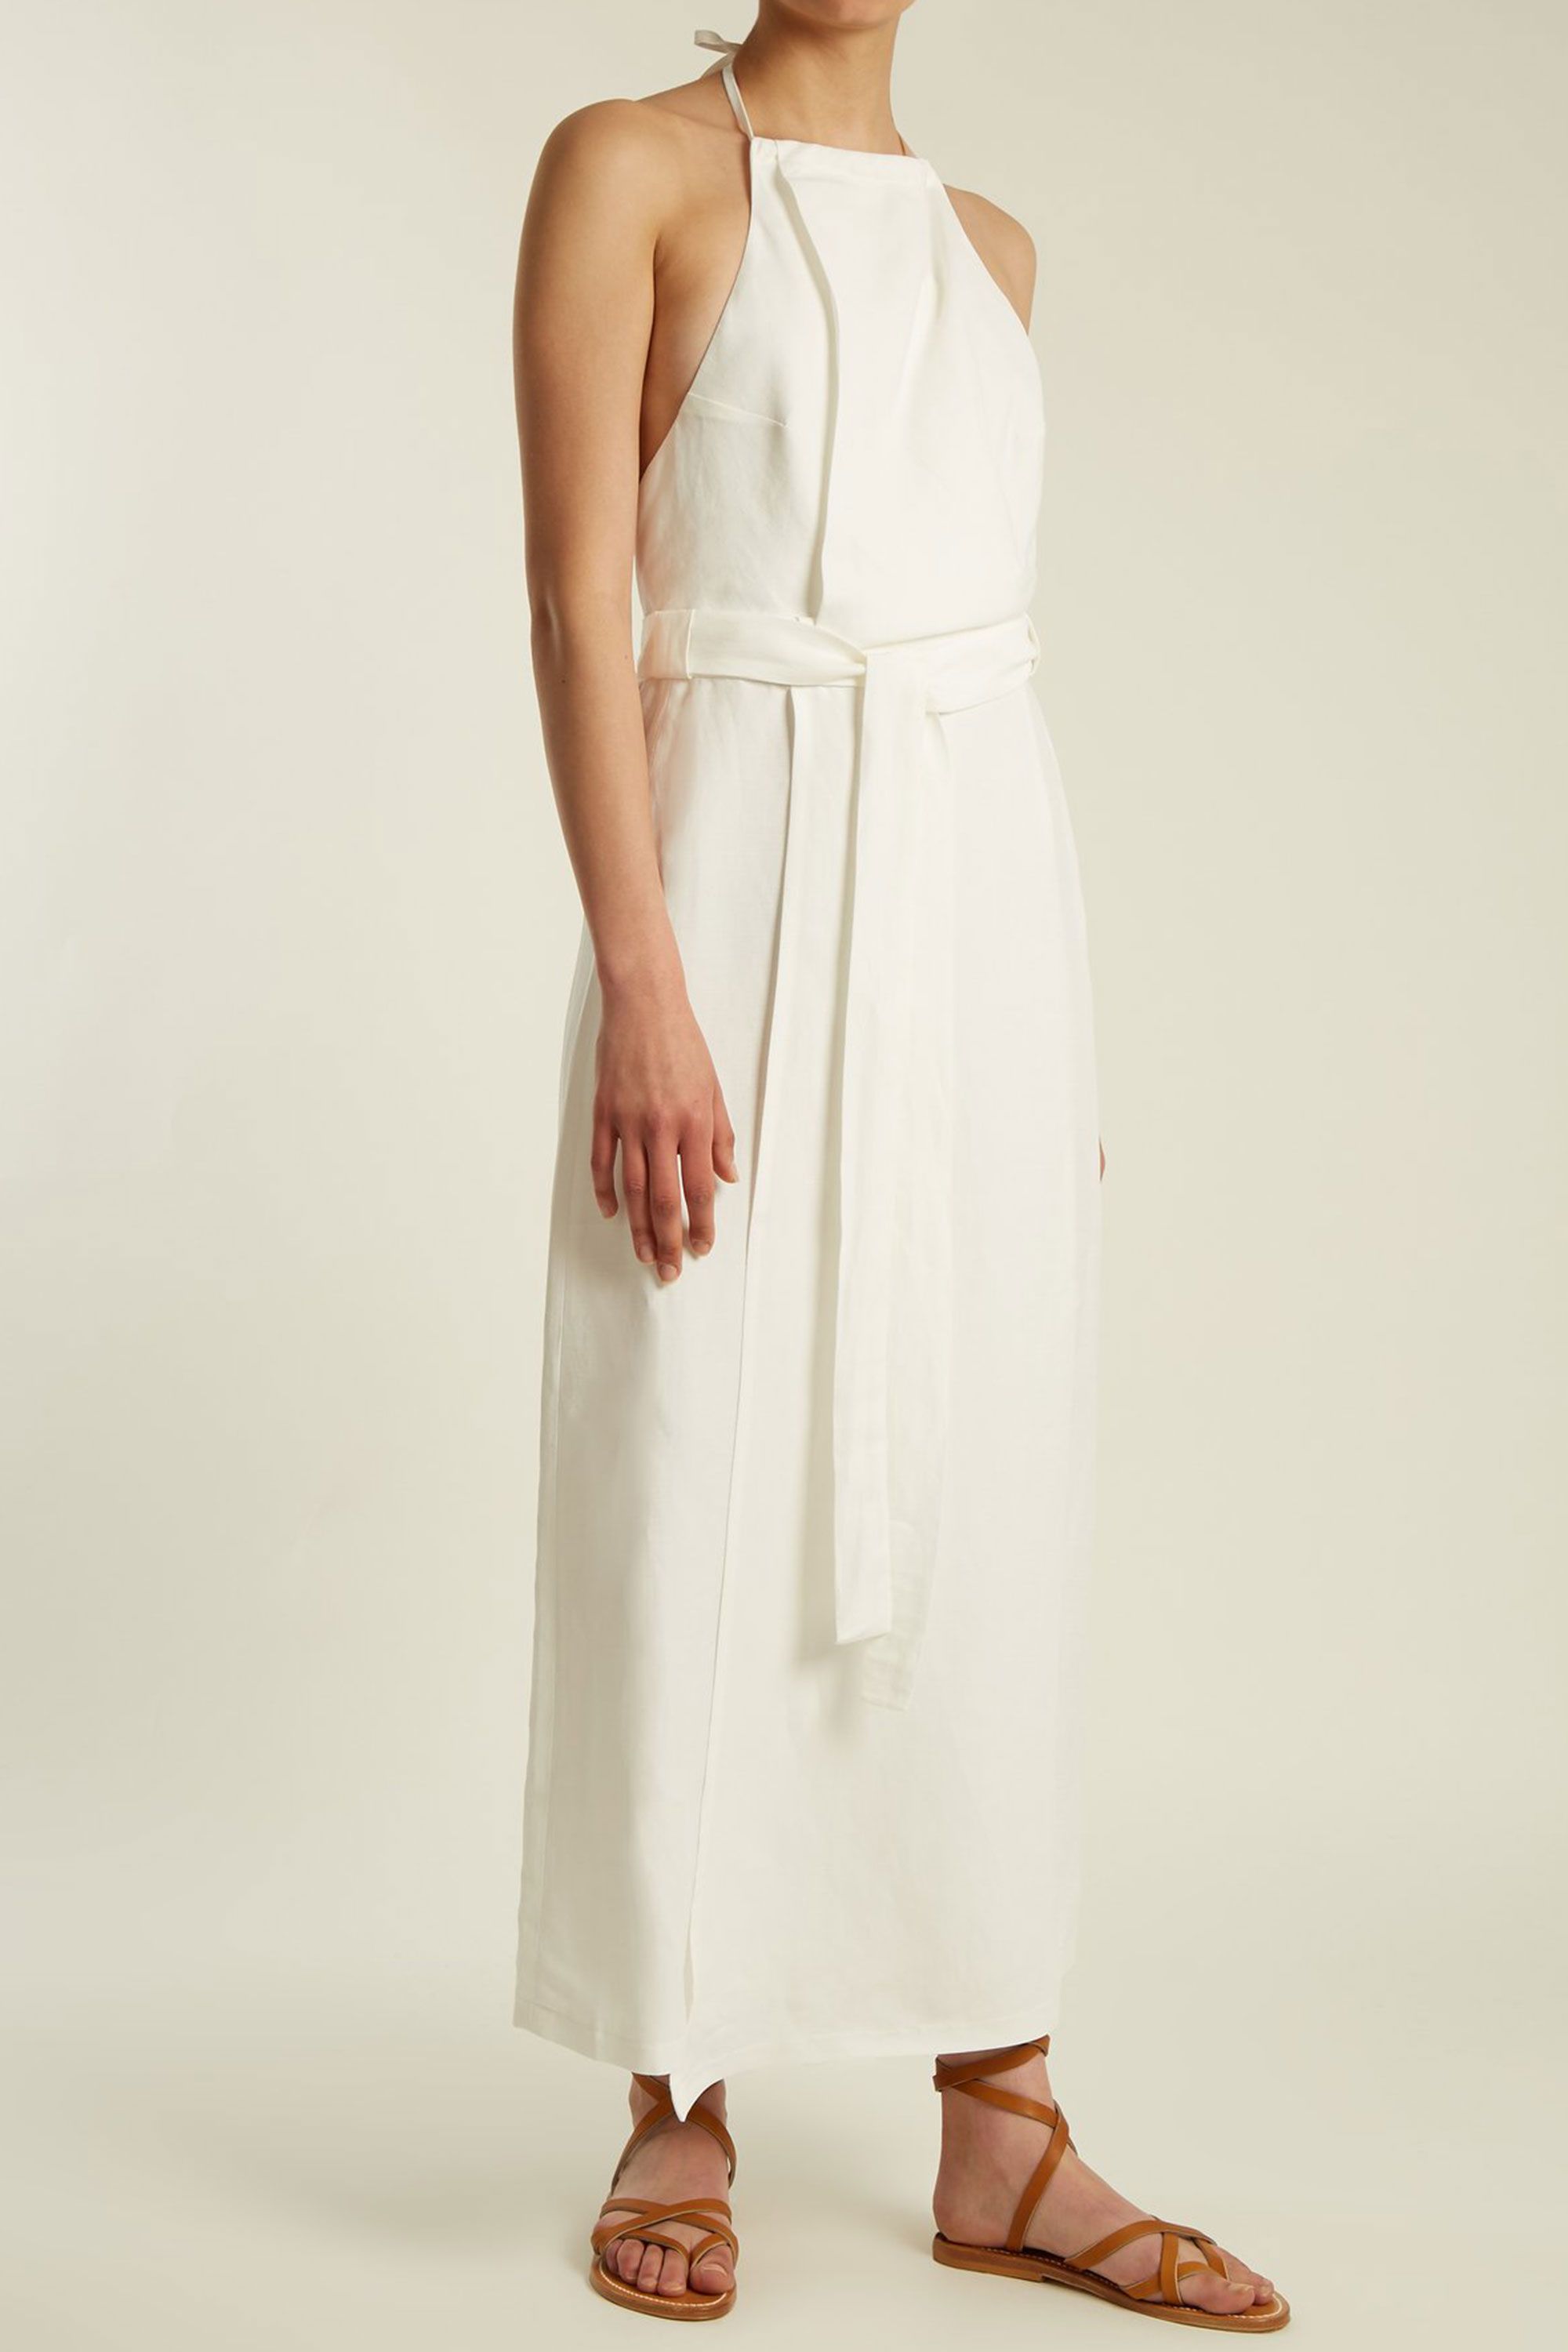 10 high-necked white dresses to buy this summer – White dresses with high  necks